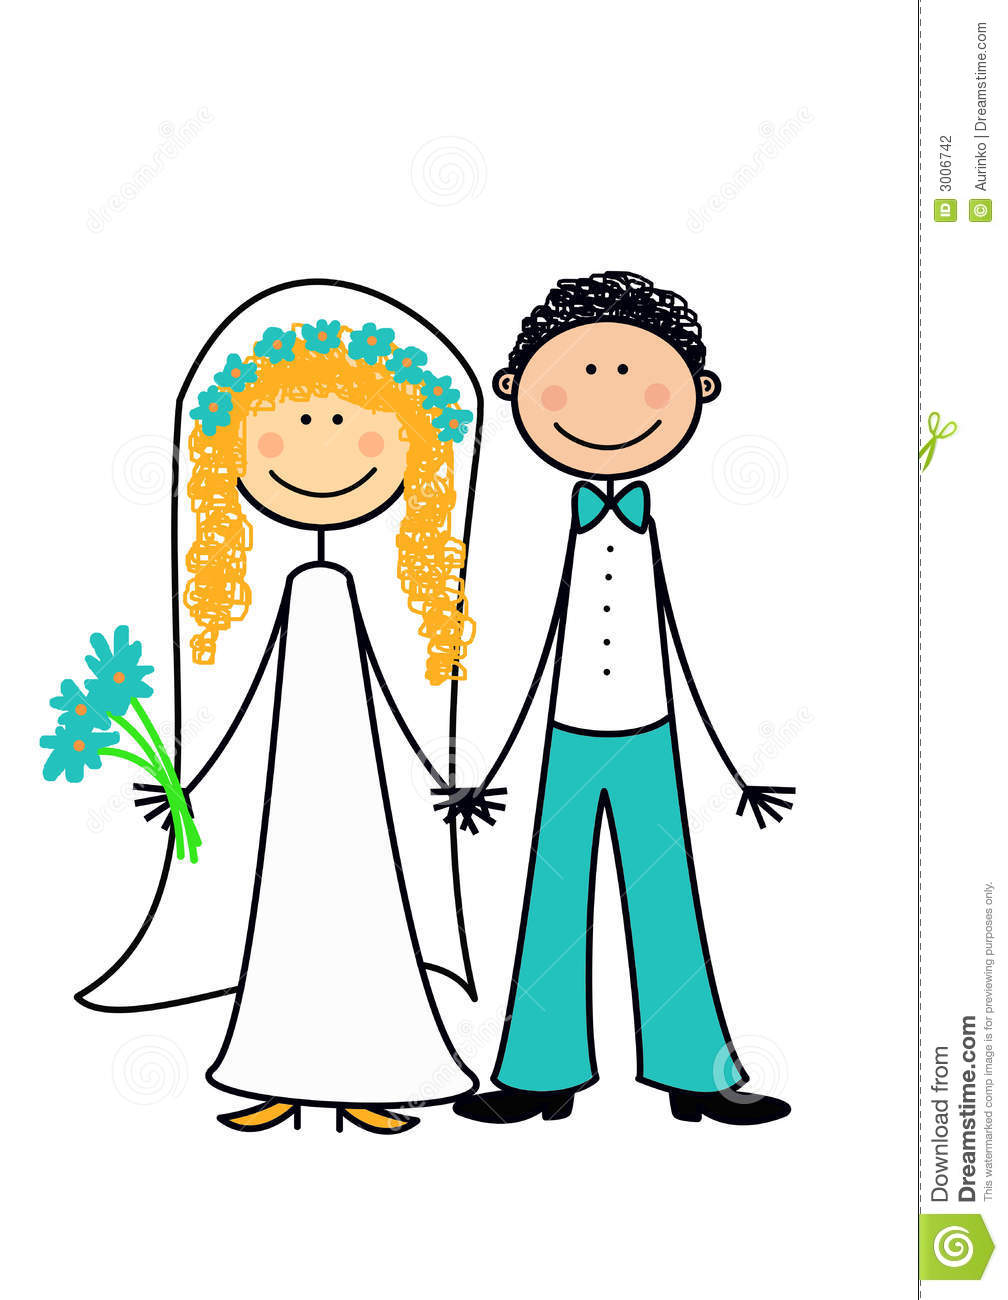 Marry clipart.